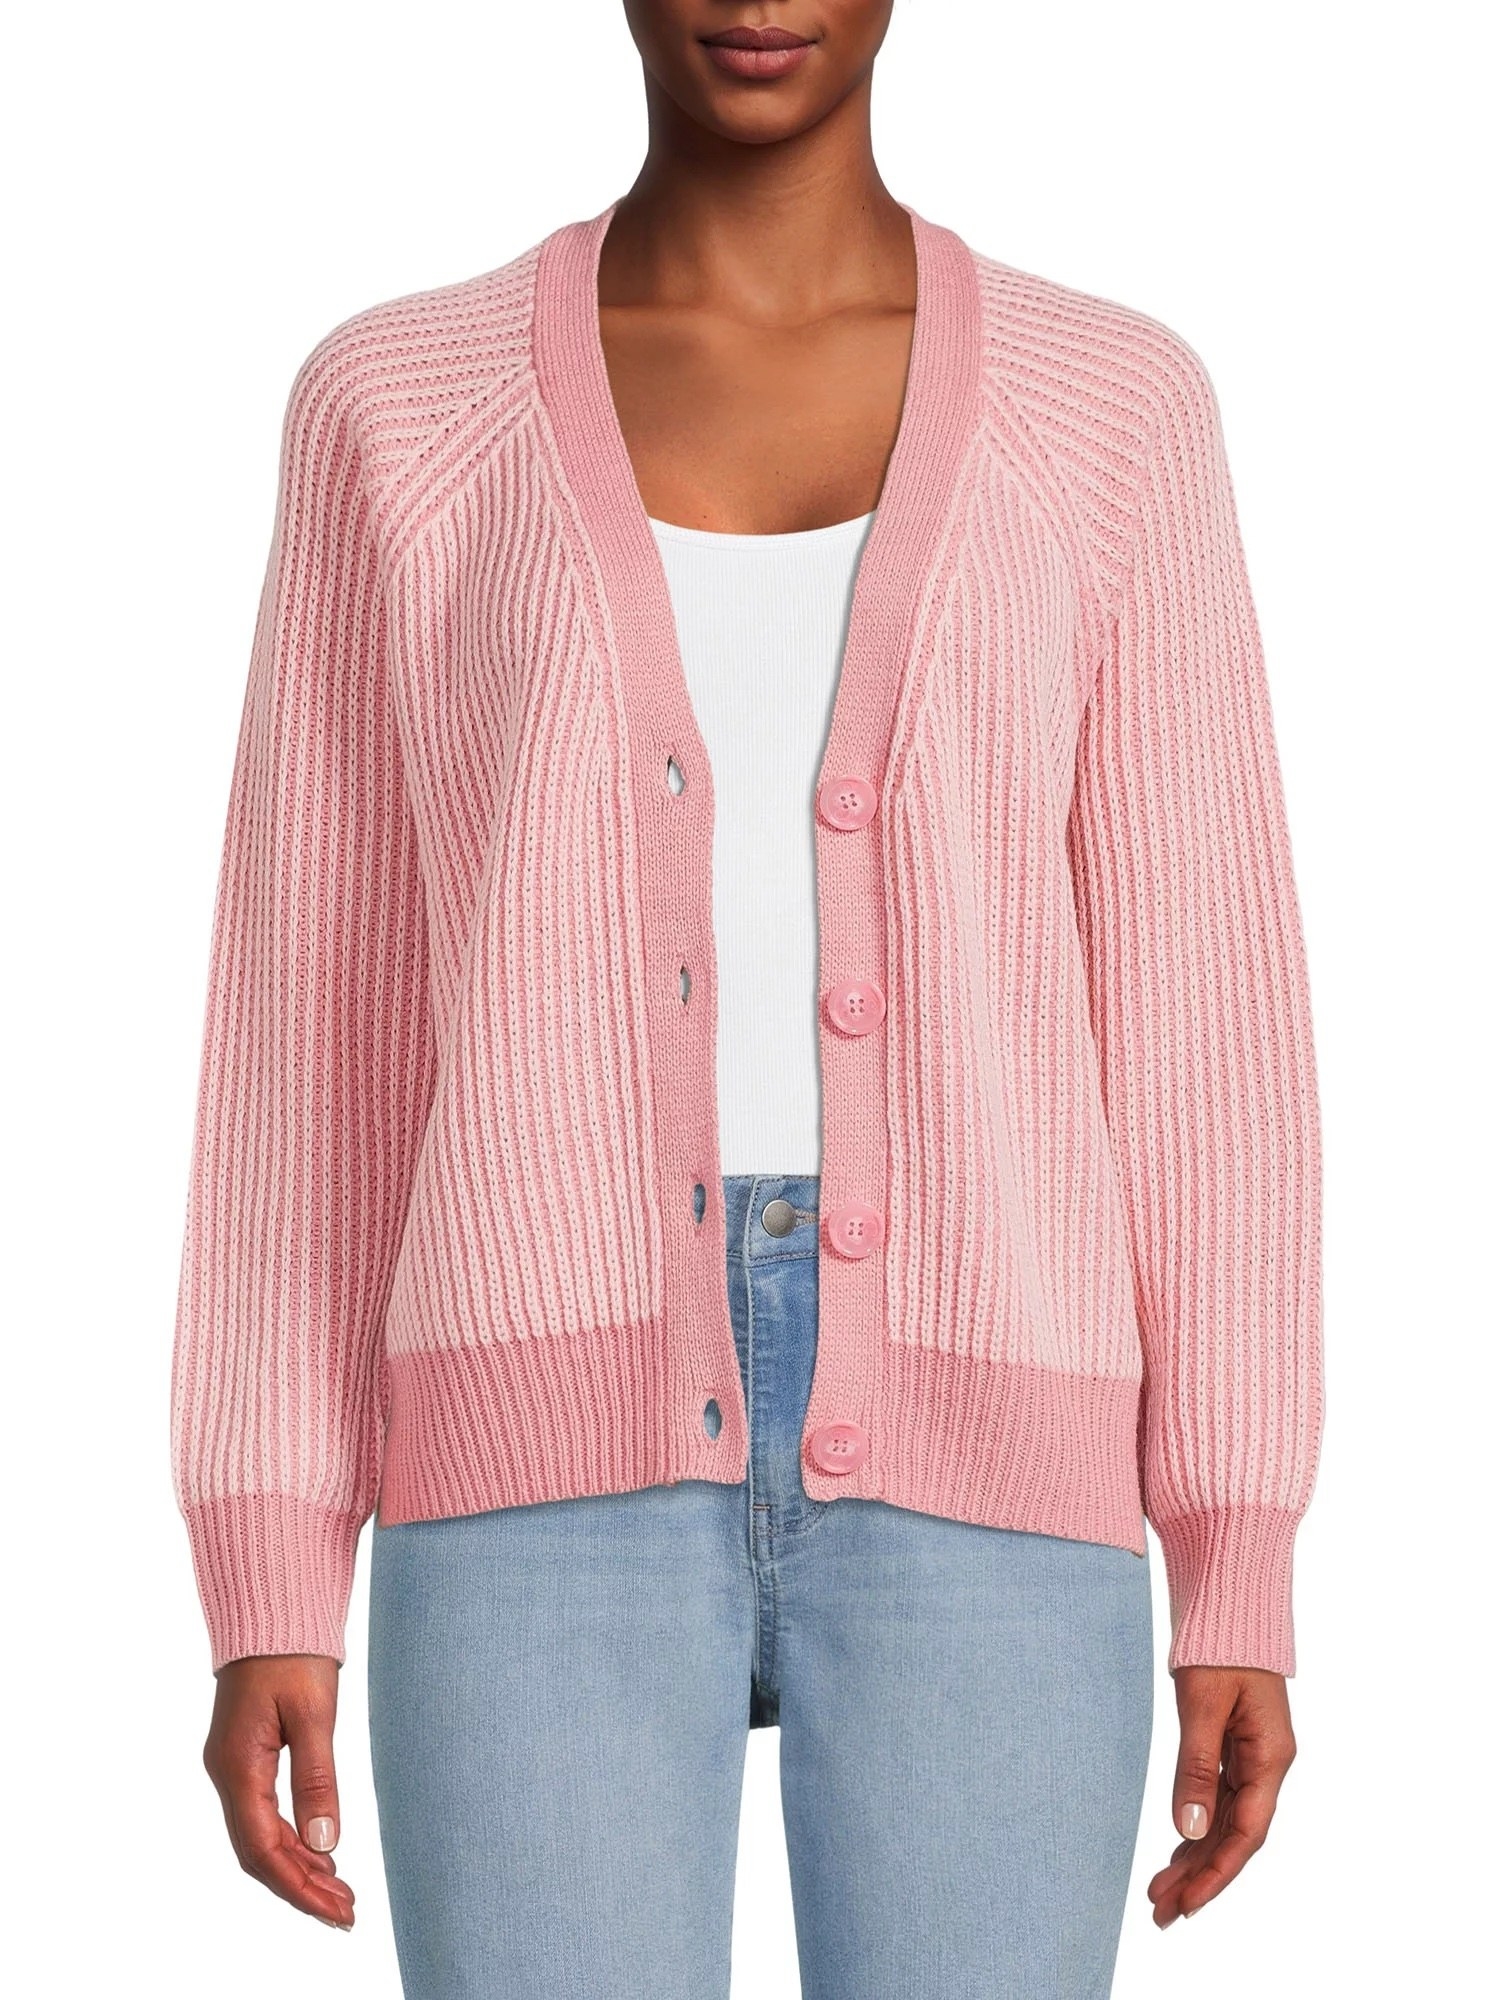 Model wearing pink cardigan over white tee and jeans